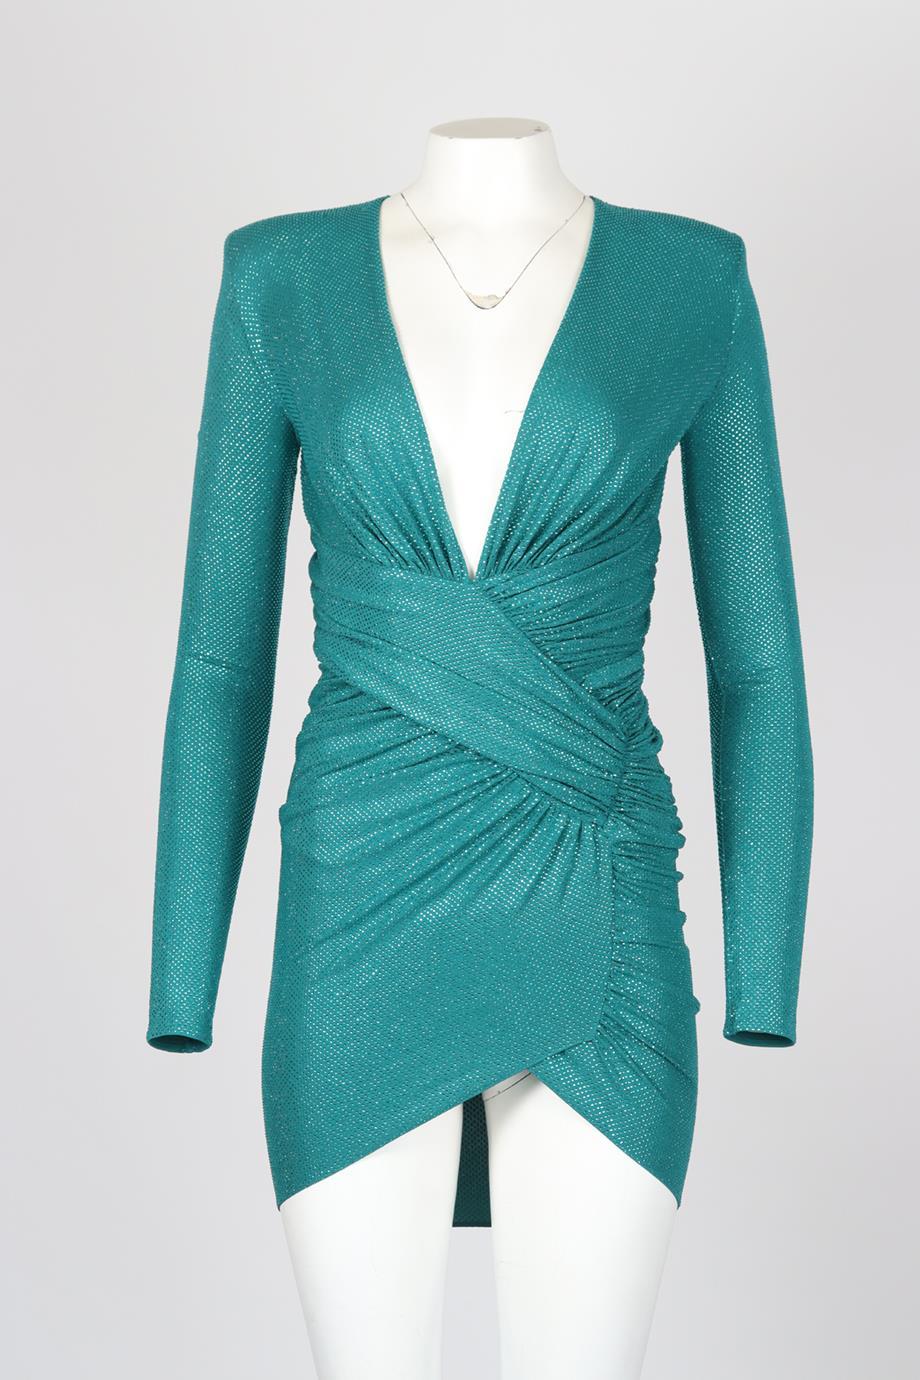 Alexandre Vauthier Embellished Stretch Jersey Mini Dress. Green. Long Sleeve. V-Neck. Slips on. 92% Viscose, 8% elastane. FR 34 (UK 6, US 2, IT 38). Bust: 29.7 in. Waist: 21.2 in. Hips: 25.3 in. Length: 31.7 in. Condition: Used. Very good condition